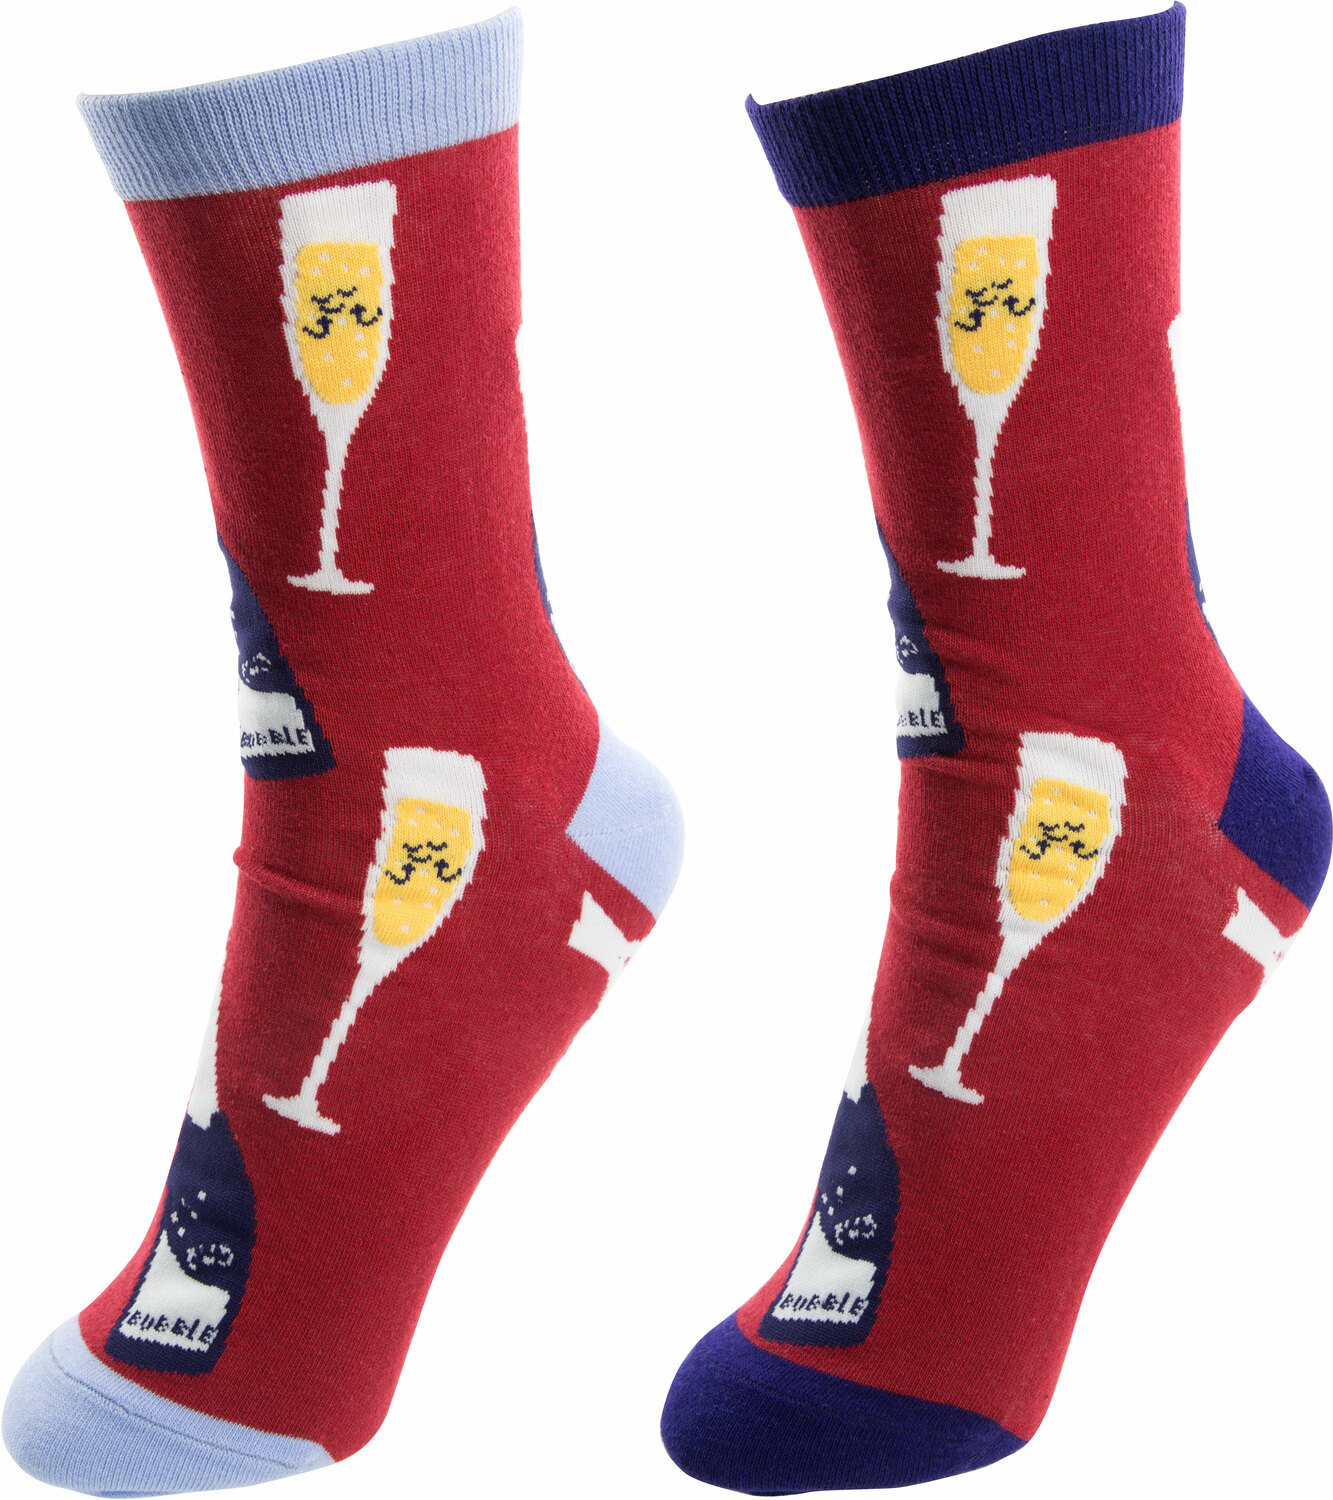 Prosecco & Raspberries by Late Night Last Call - Prosecco & Raspberries - S/M Unisex Socks